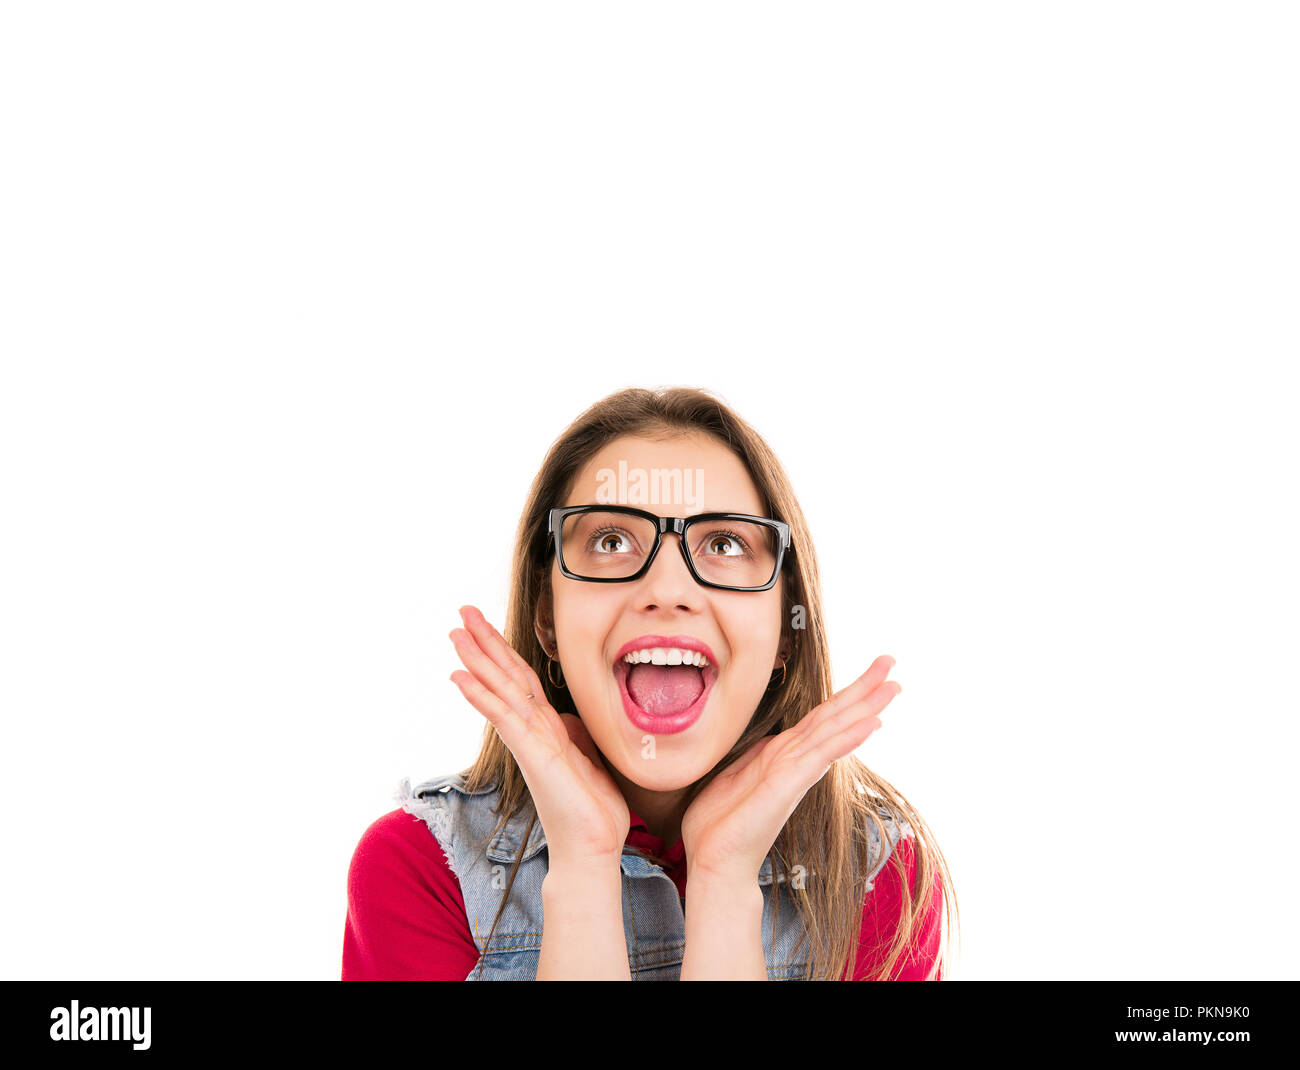 Bright excited young woman in glasses looking up in happiness isolated on white background Stock Photo